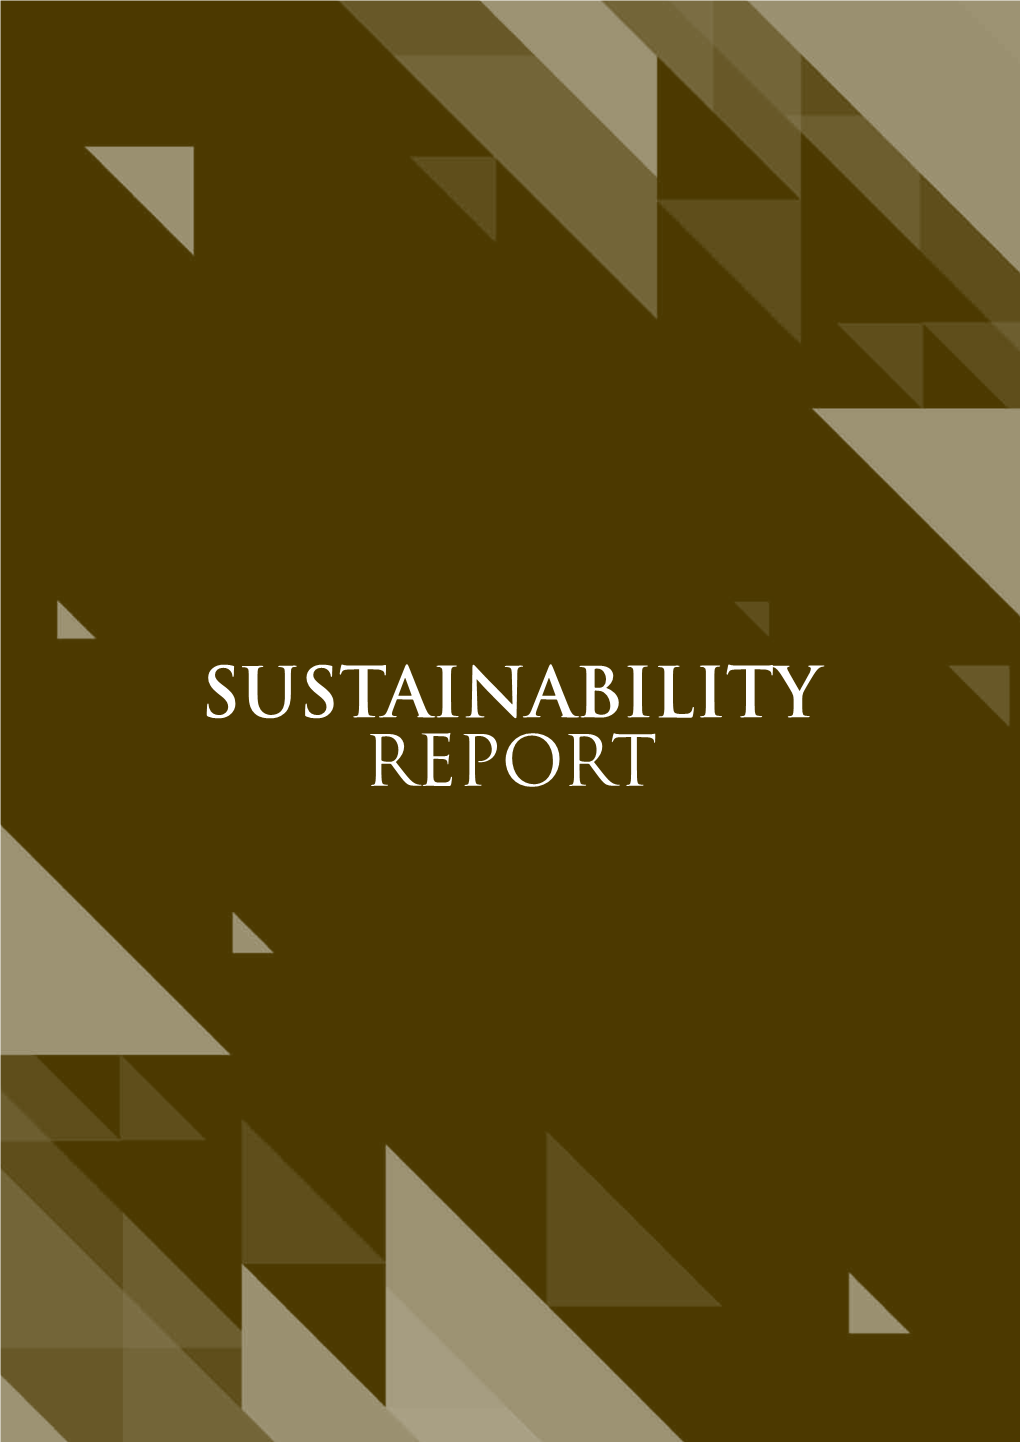 Sustainability Report SUSTAINABILITY REPORT PADINI HOLDINGS BERHAD YEAR ENDED JUNE 2020 SUSTAINABILITY REPORT 2020 PADINI HOLDINGS BERHAD (197901005918 (50202-A))